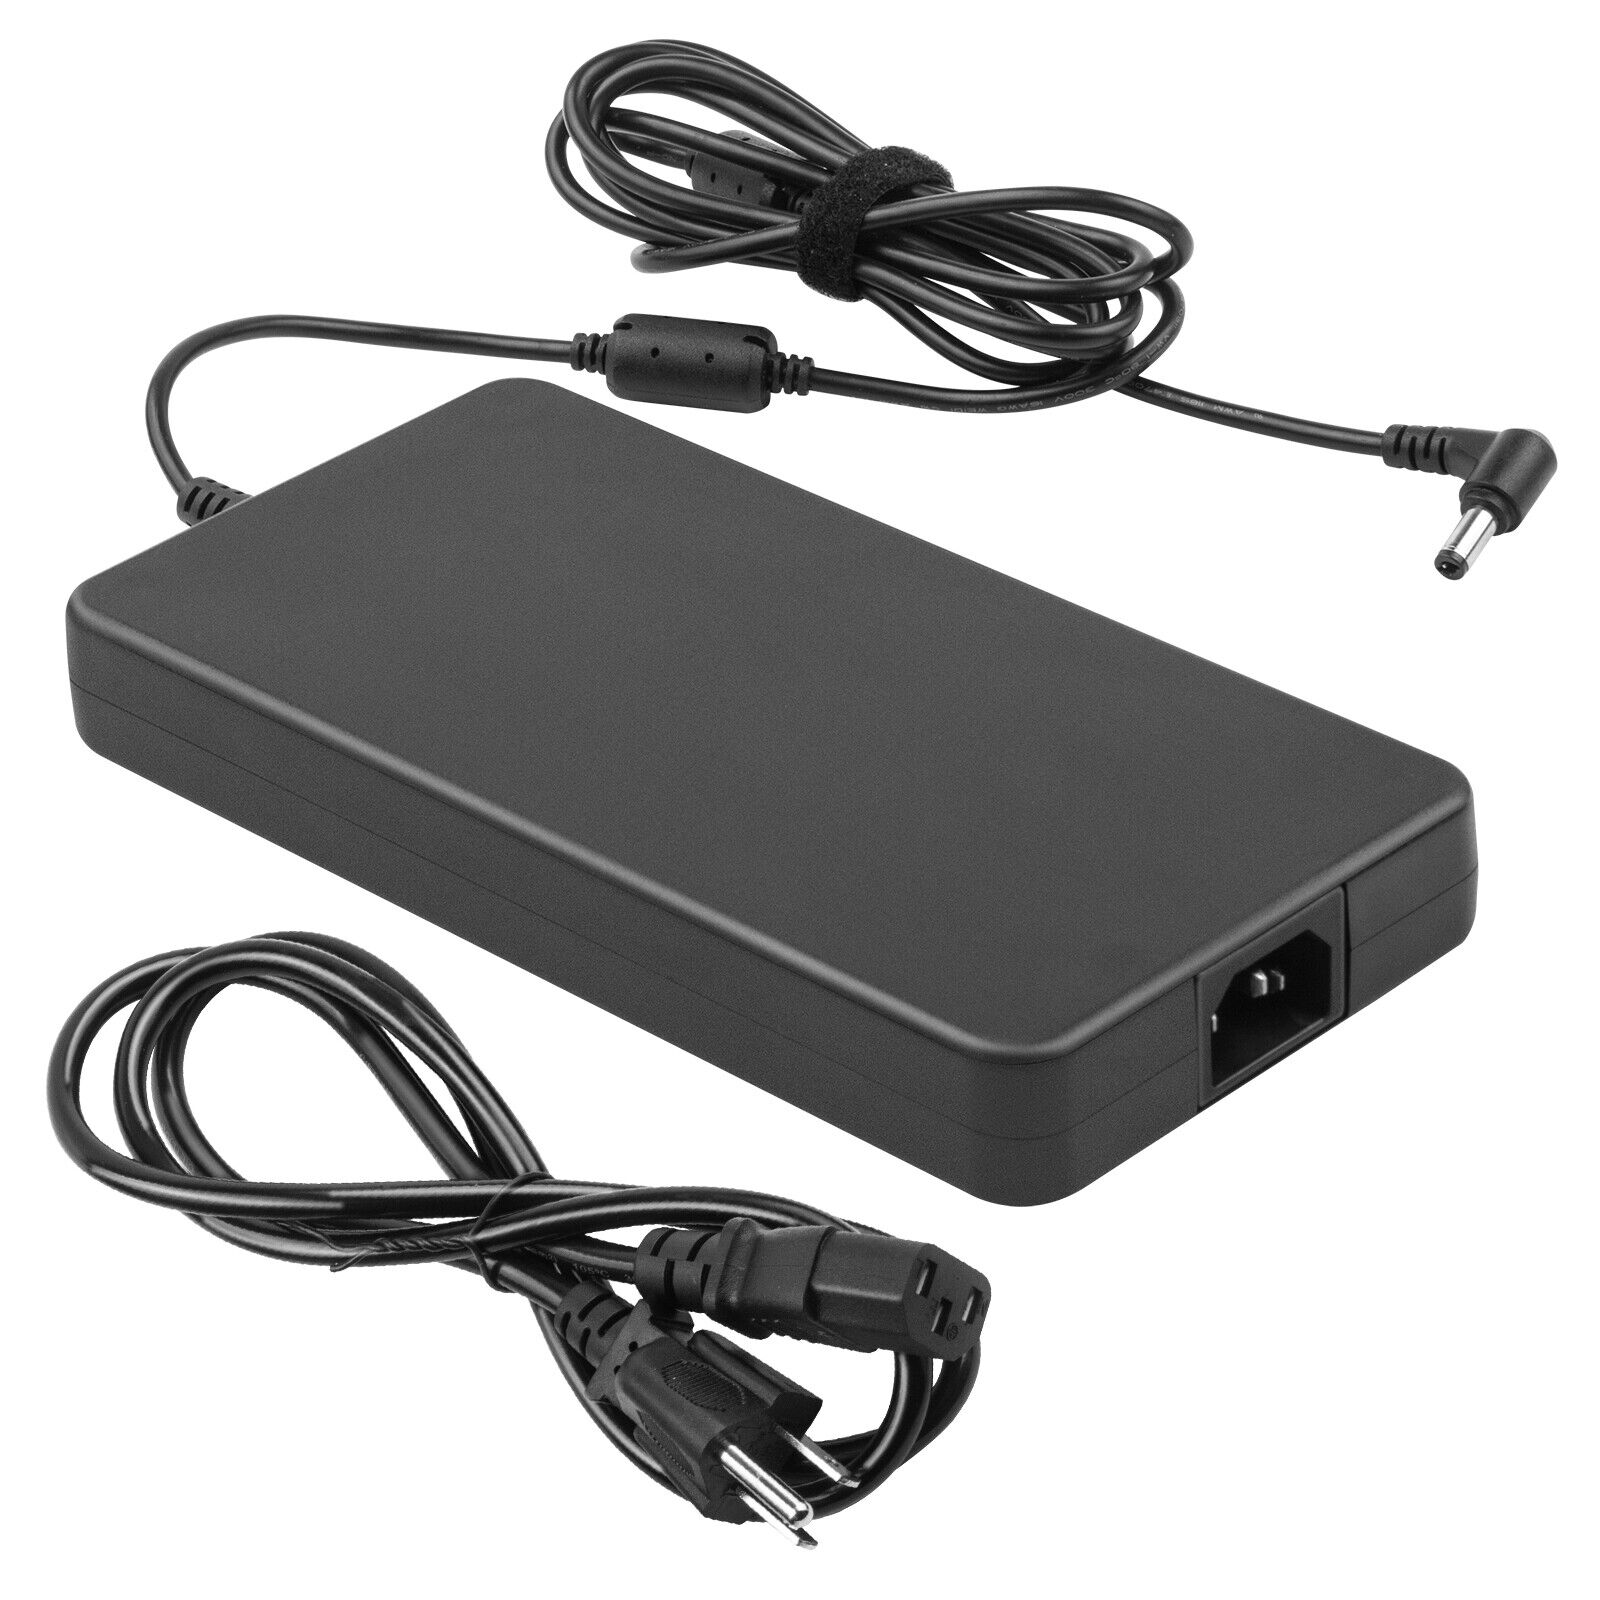 Dragon-2202 Dragon-1886 180W AC Adapter Charger for MSI GT70 Dominator Dragon 